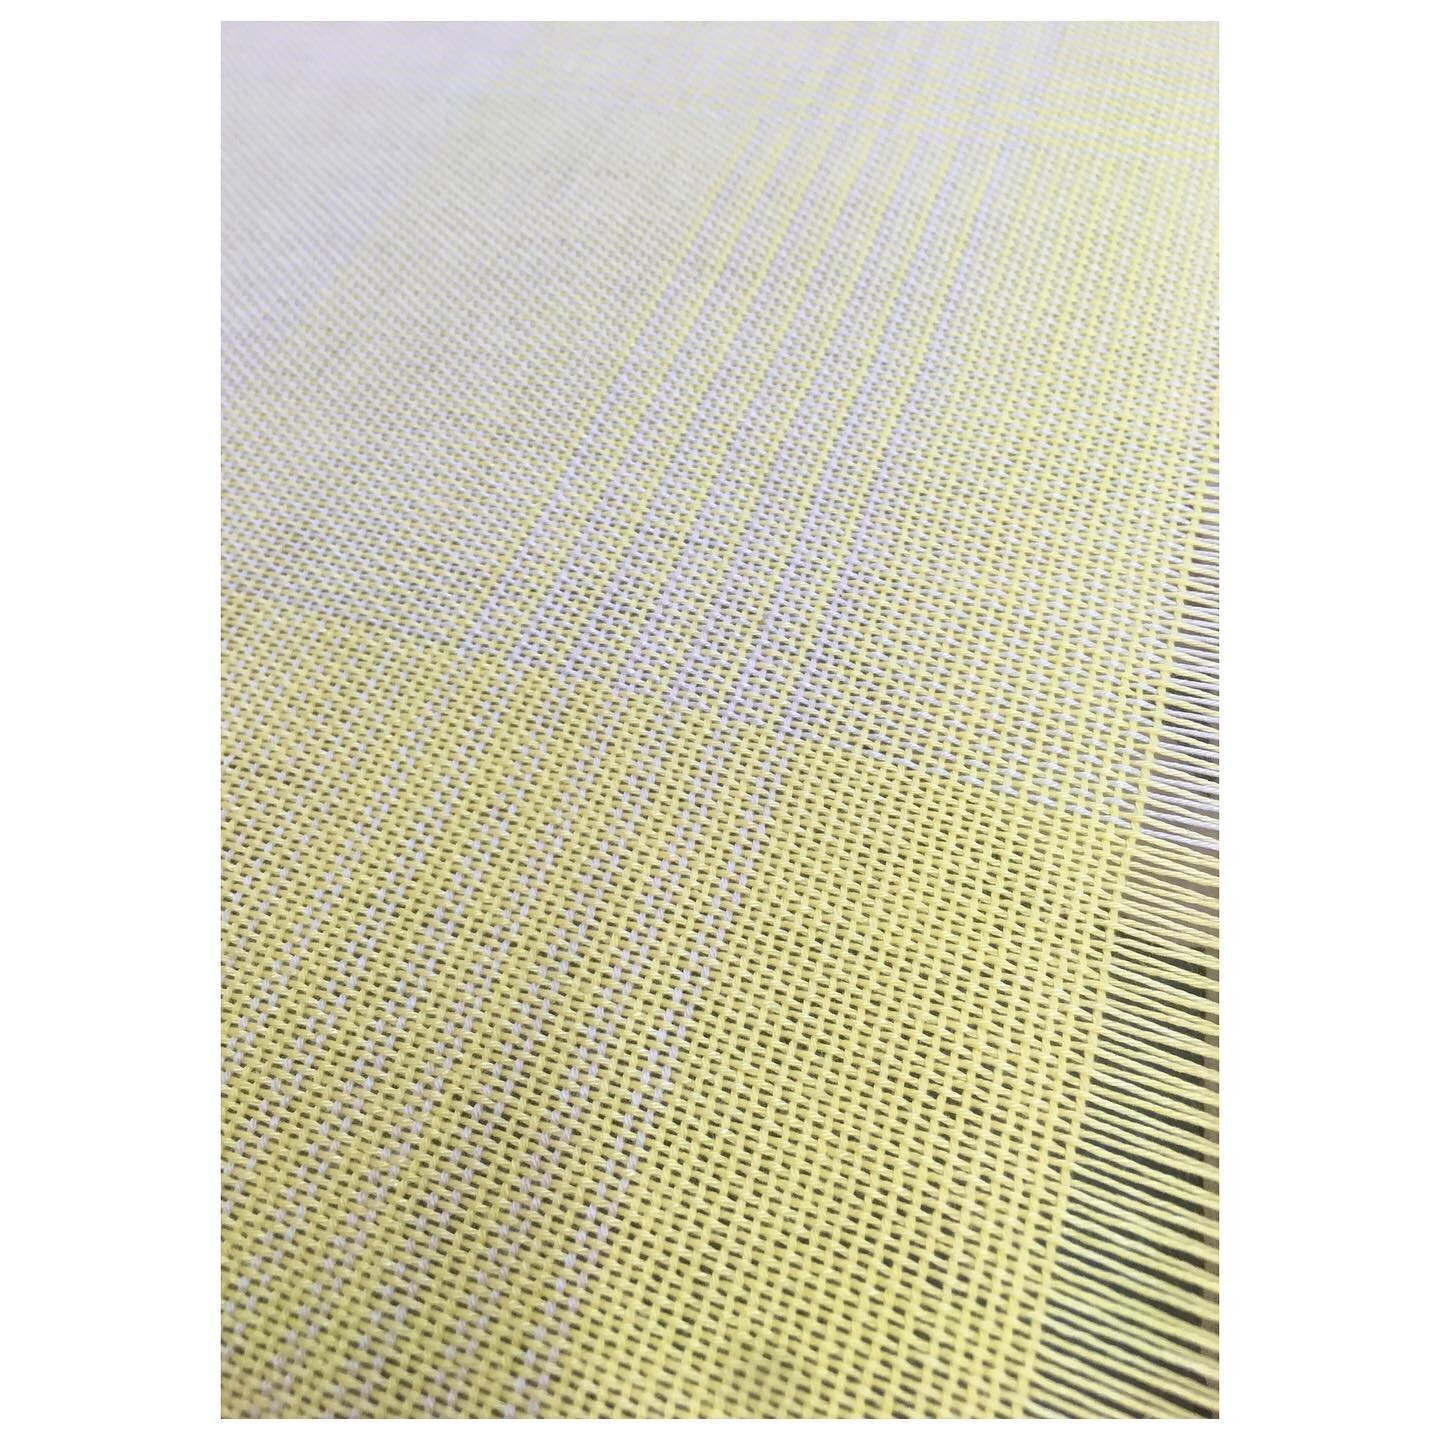 - simplicity

reminds me of the sun shining through the foggy winter sky

#dobbyweave #simplebutbeautiful #textiledesign #handwoven #materialmatters #swissmade #localproduction #madeinzurich #smalllabel #veralynntextiledesign